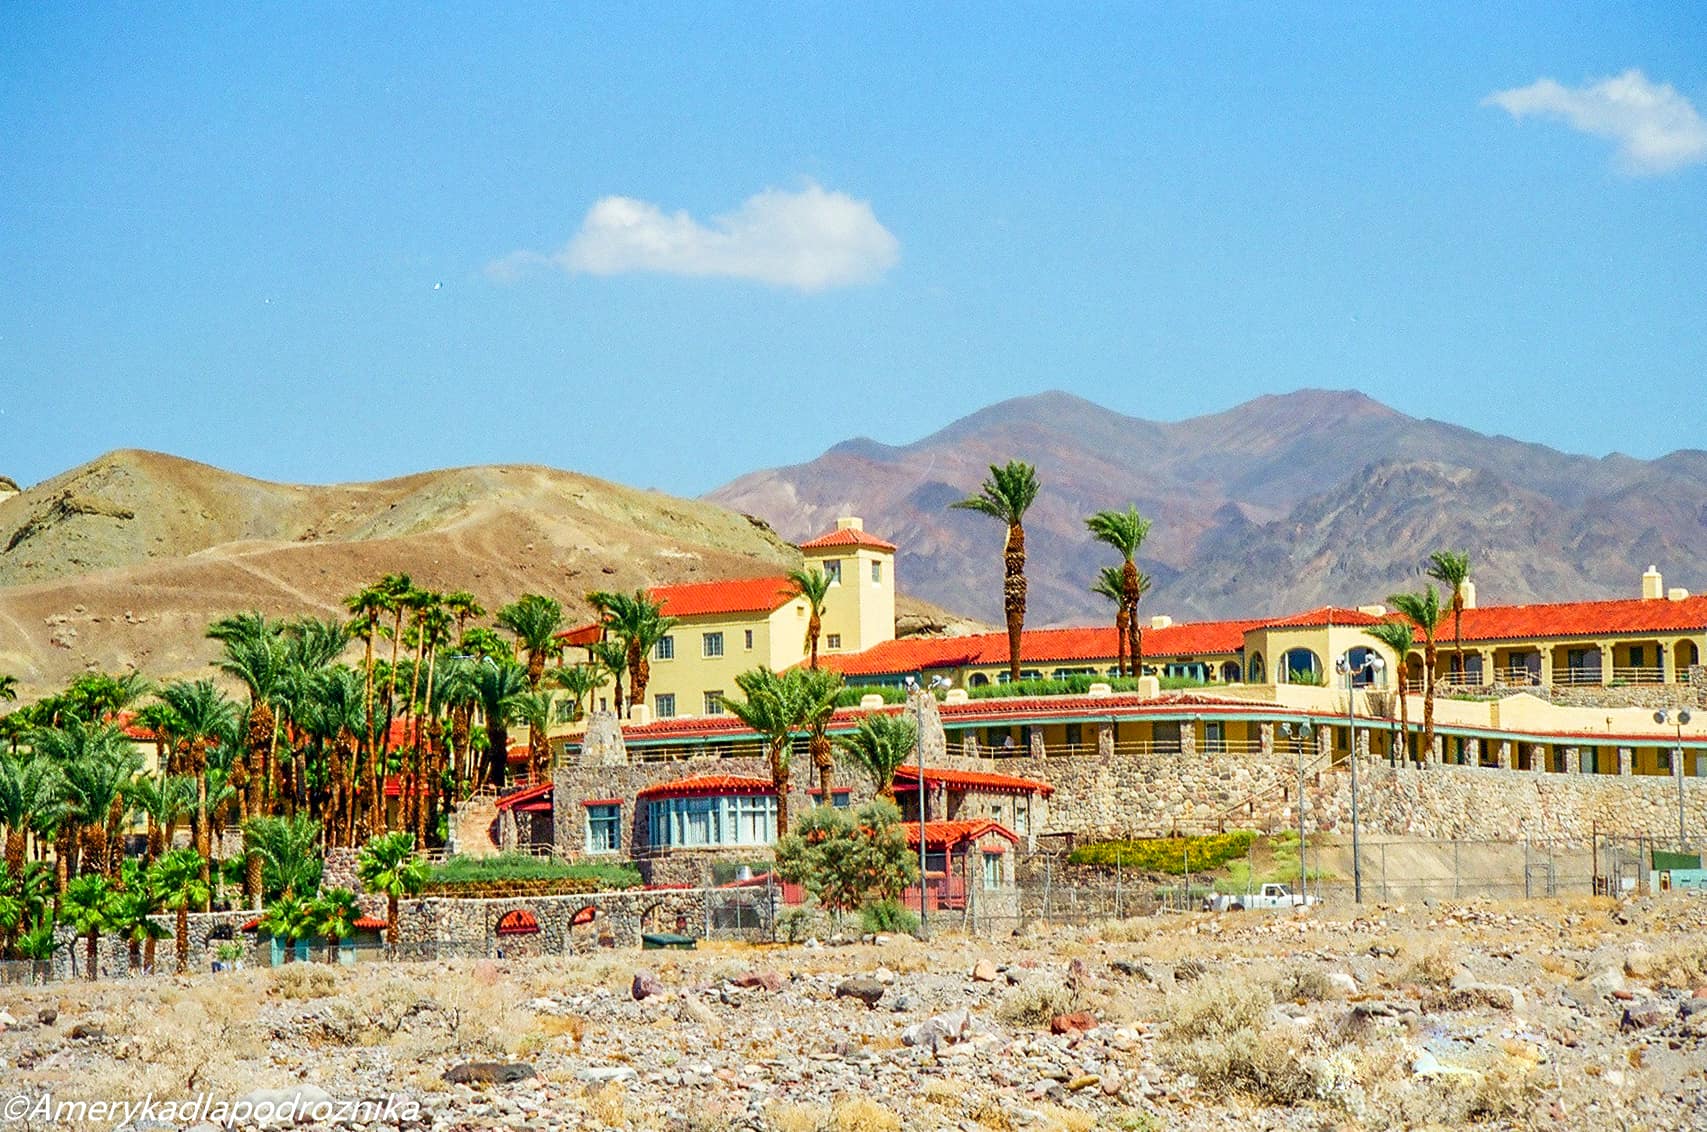 The Inn at the Death Valley